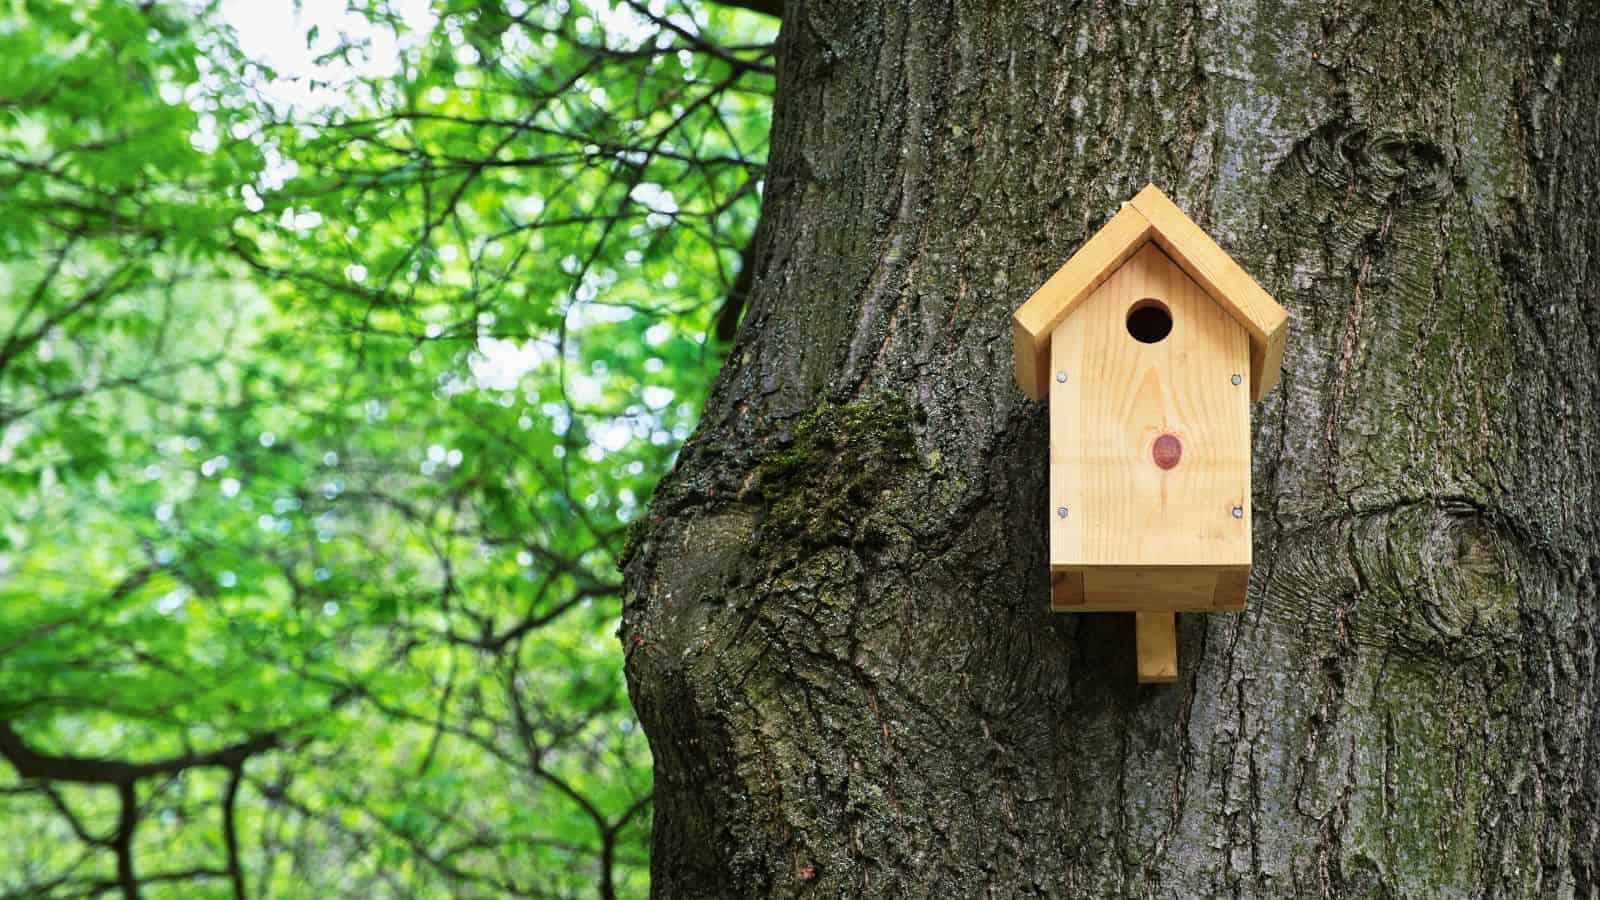 <p>A birdhouse is an easy woodworking project that is perfect for beginners. Let your kiddos help you make them. They will love showing off something they made with their own two hands.</p>